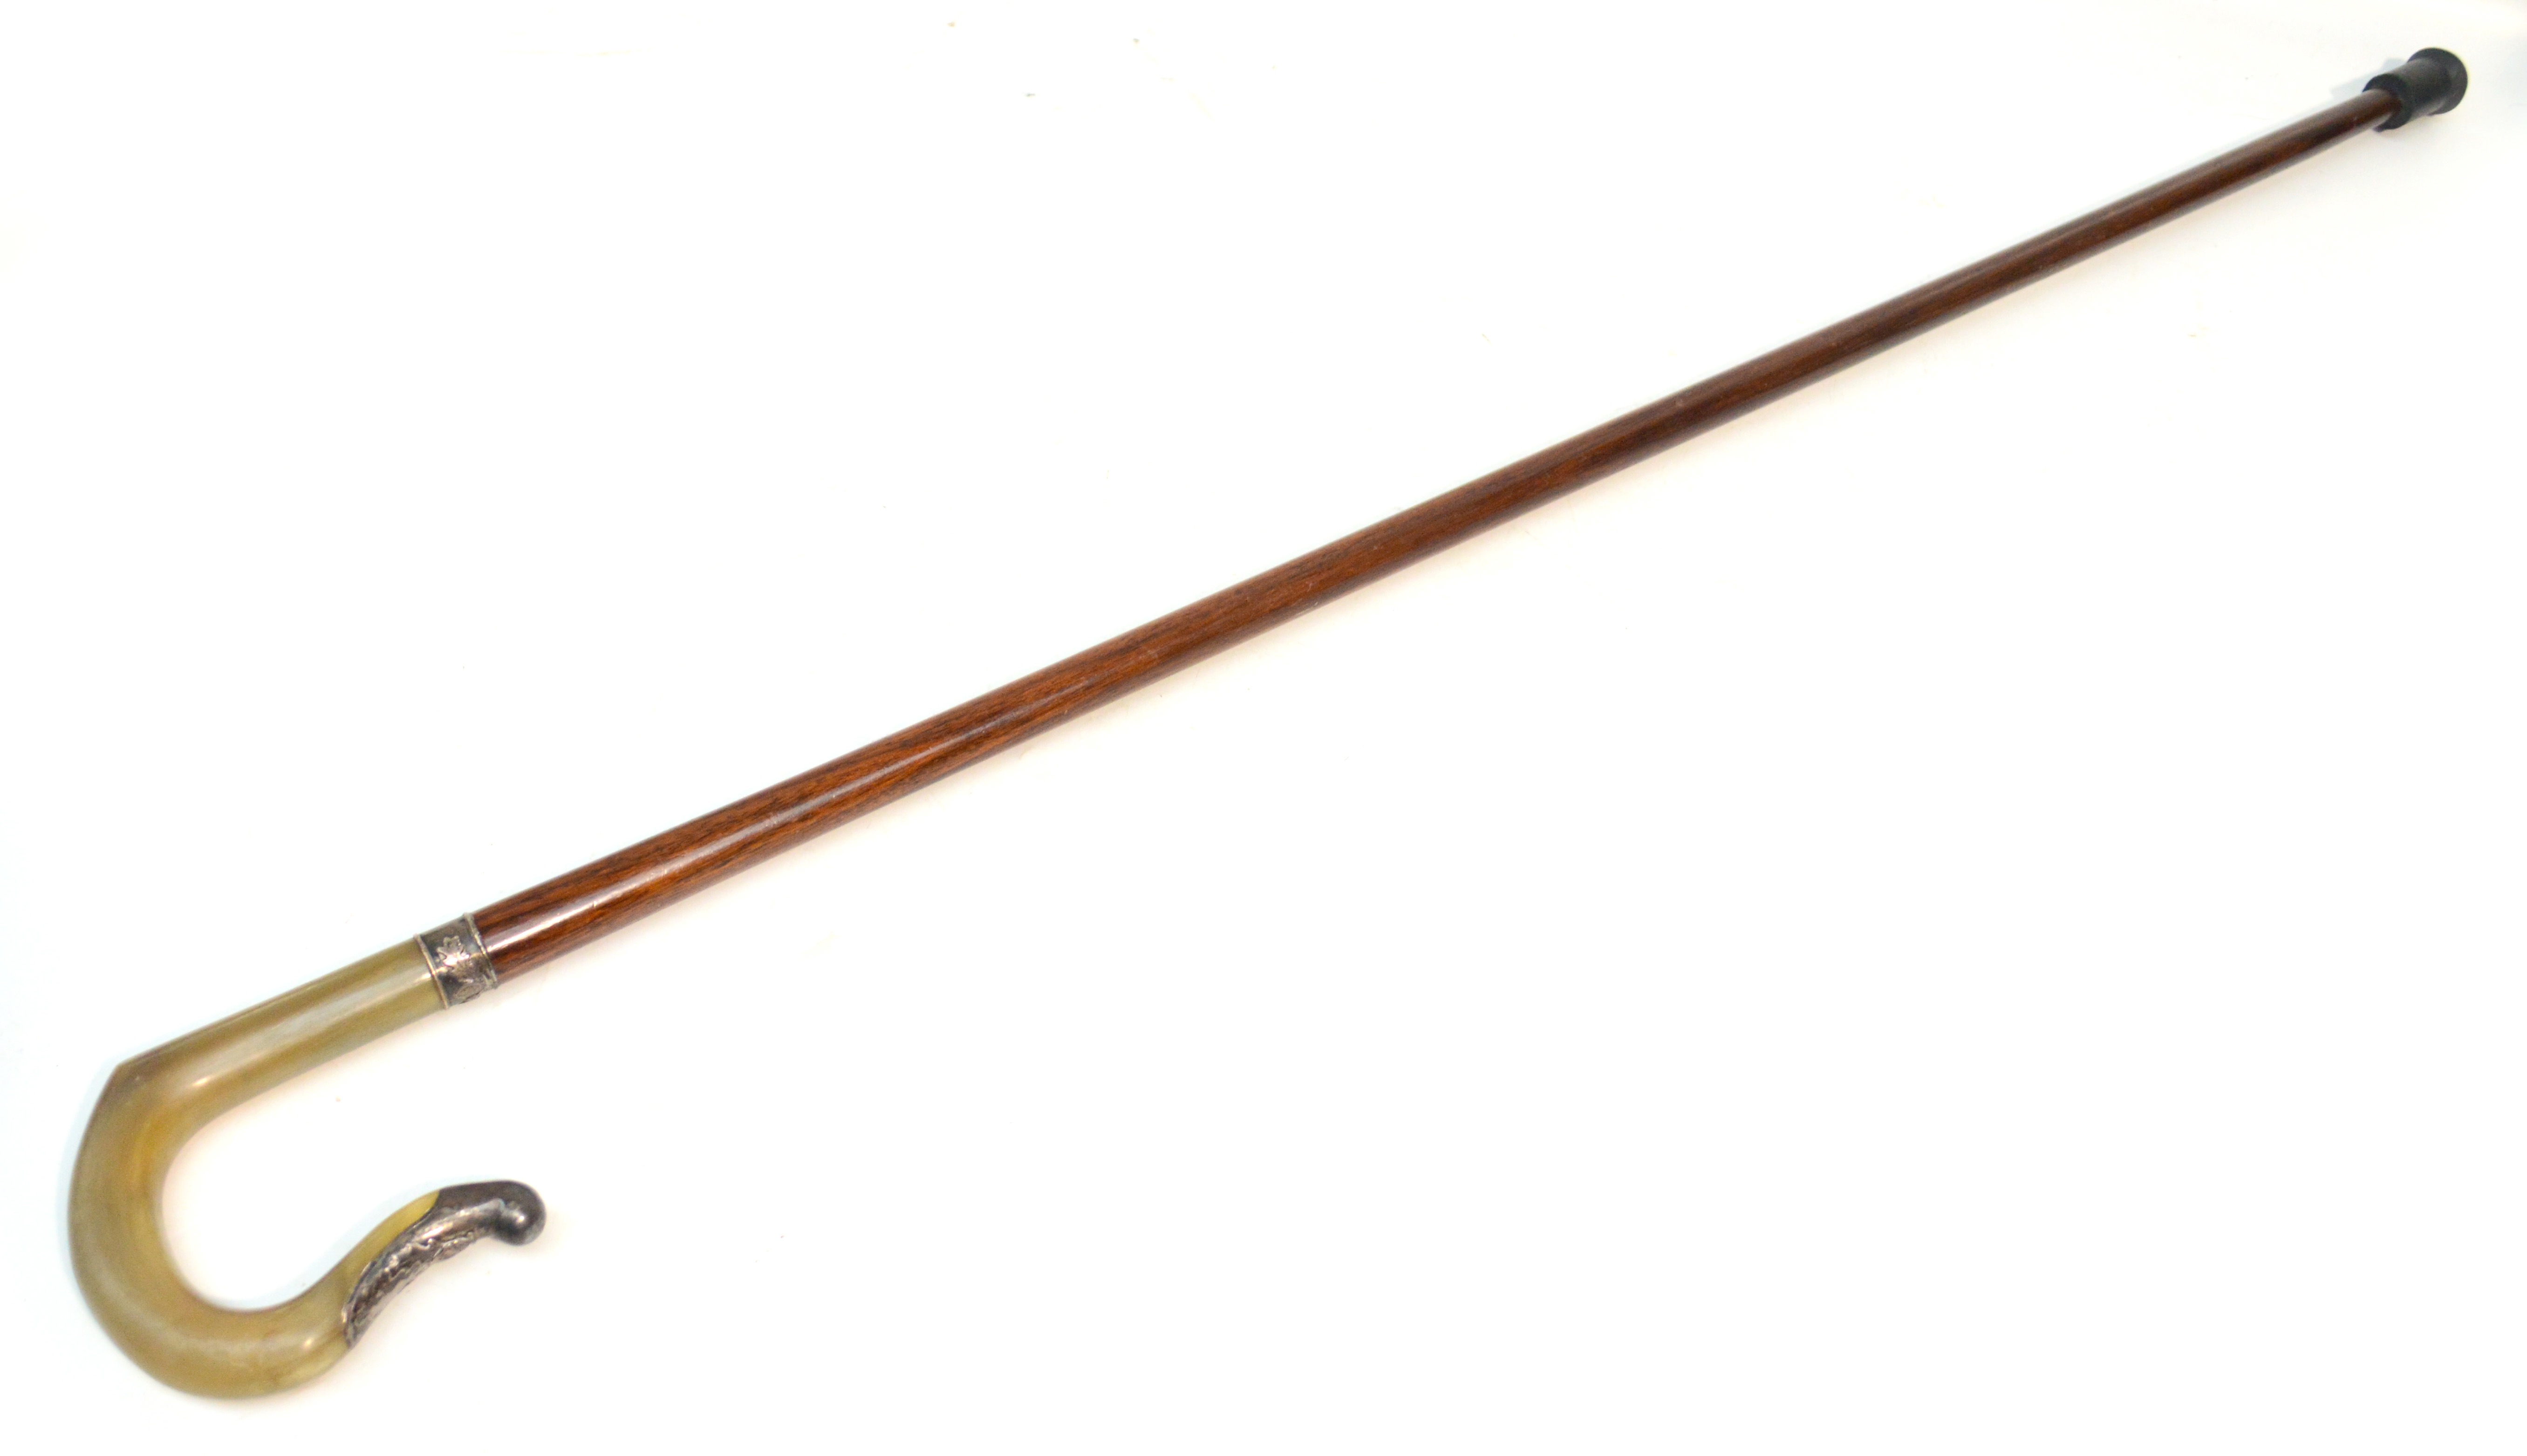 A rosewood shafted horn handled and silver mounted walking stick by Steve Kyme with acorn and oak